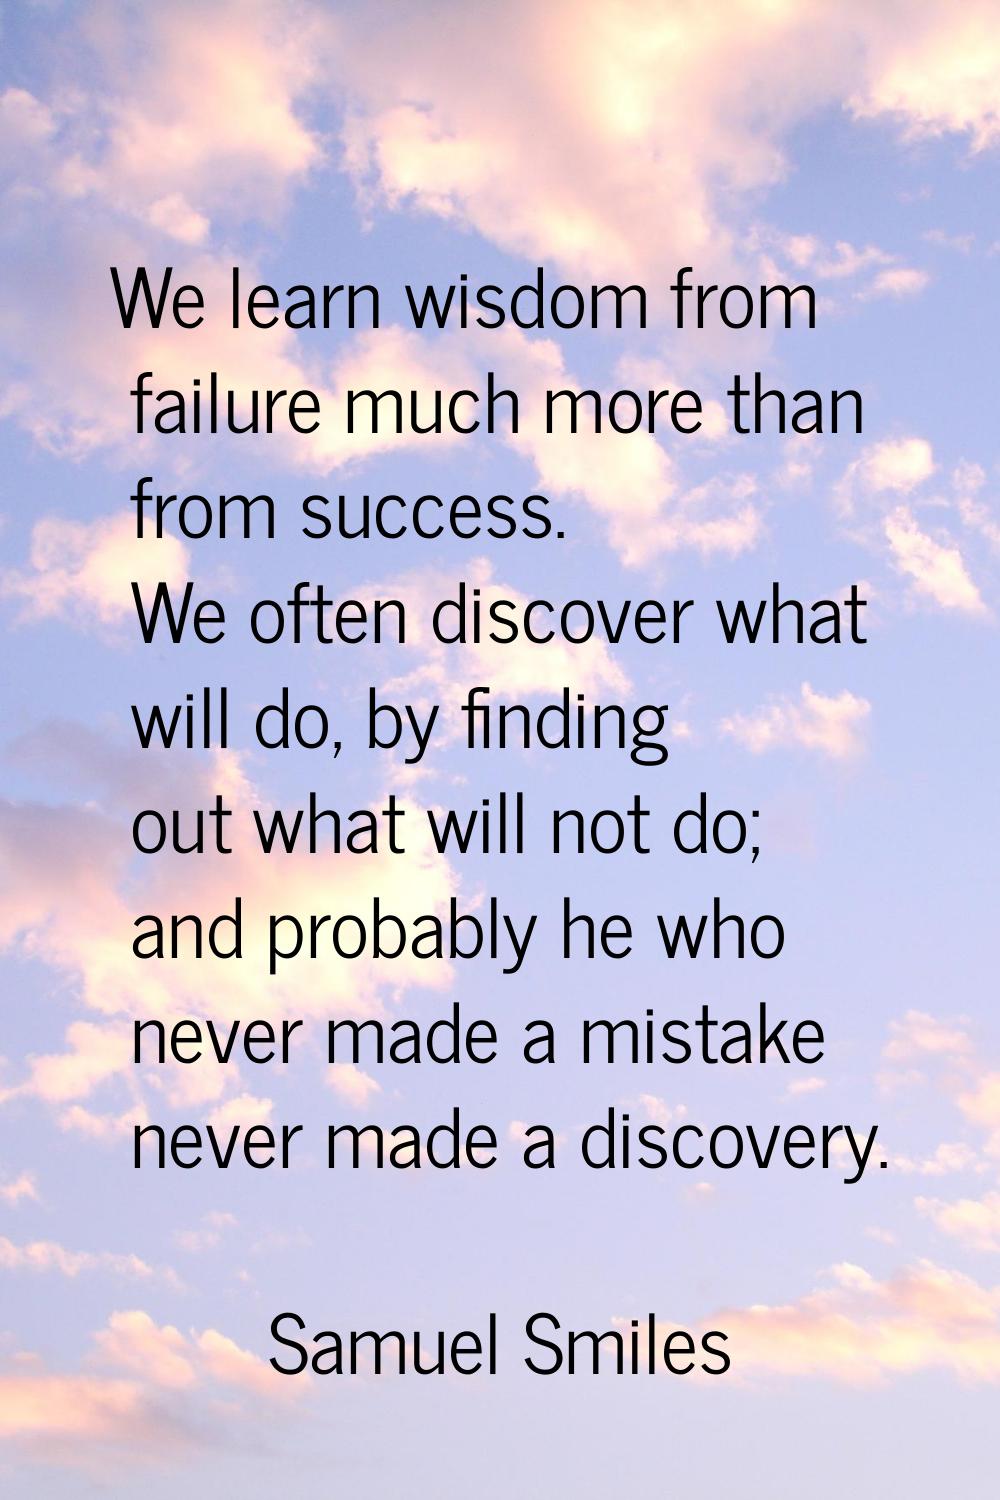 We learn wisdom from failure much more than from success. We often discover what will do, by findin